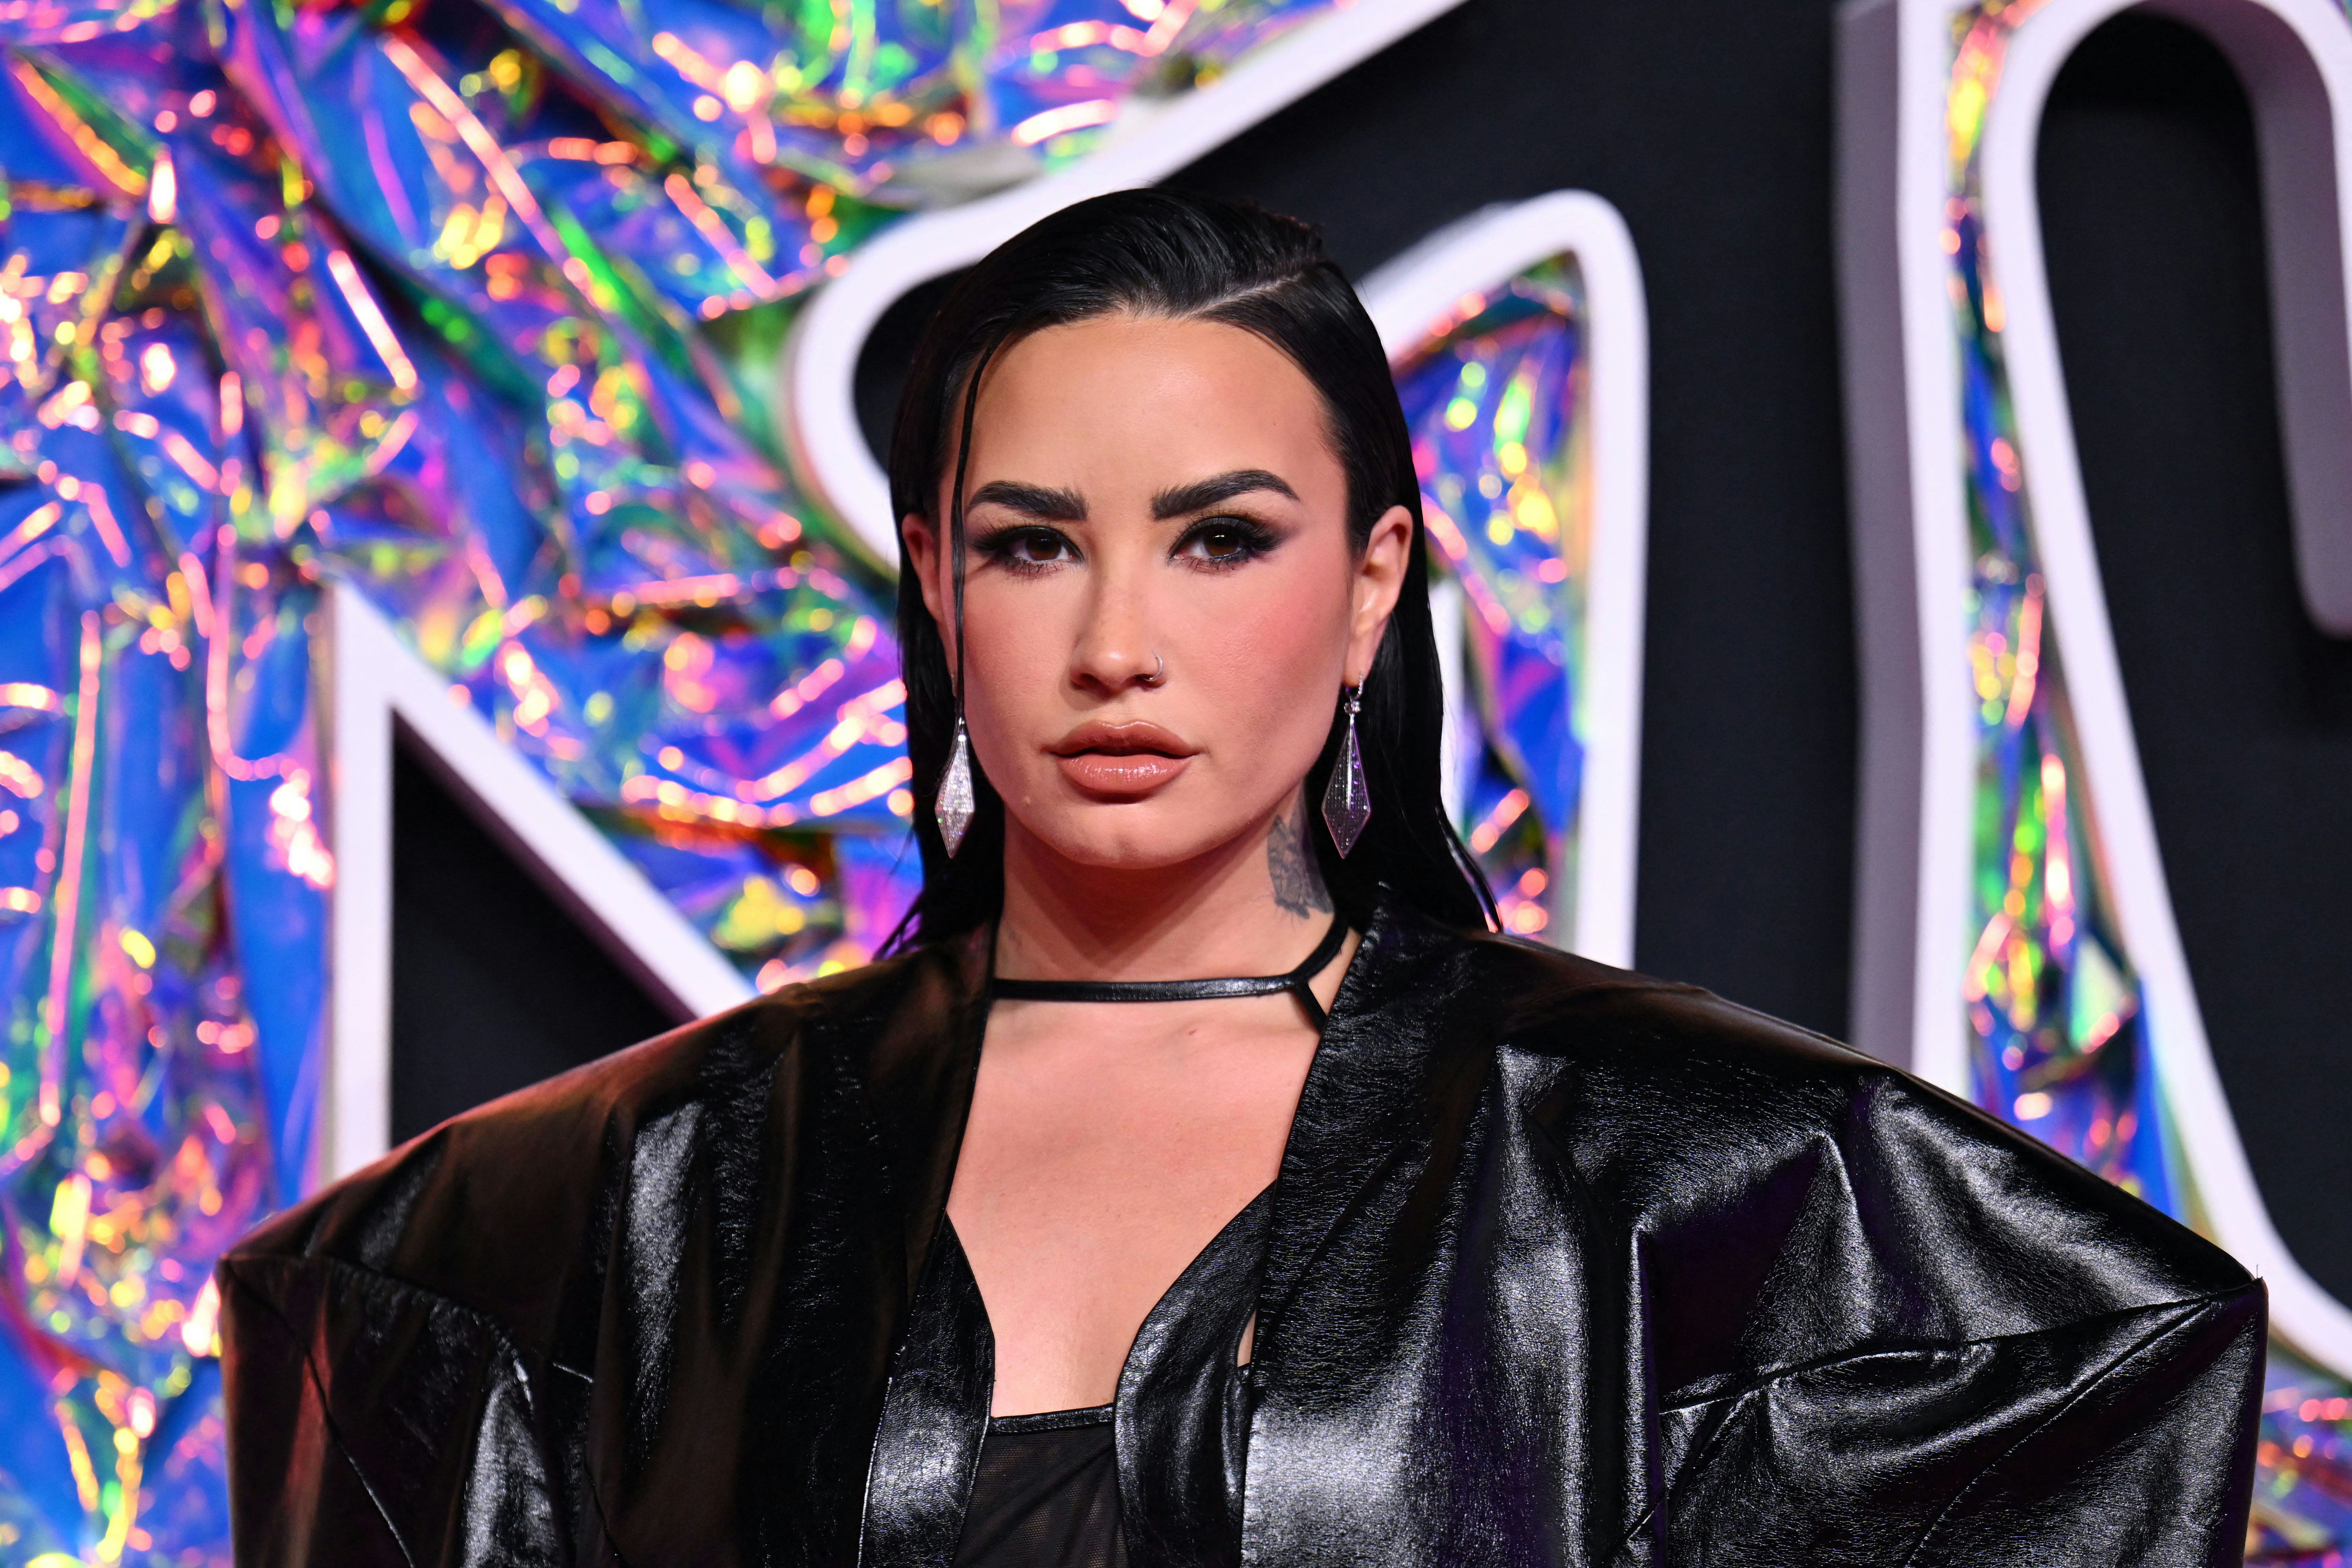 Demi Lovato Song 'Cool for the Summer' Is About Female Romance